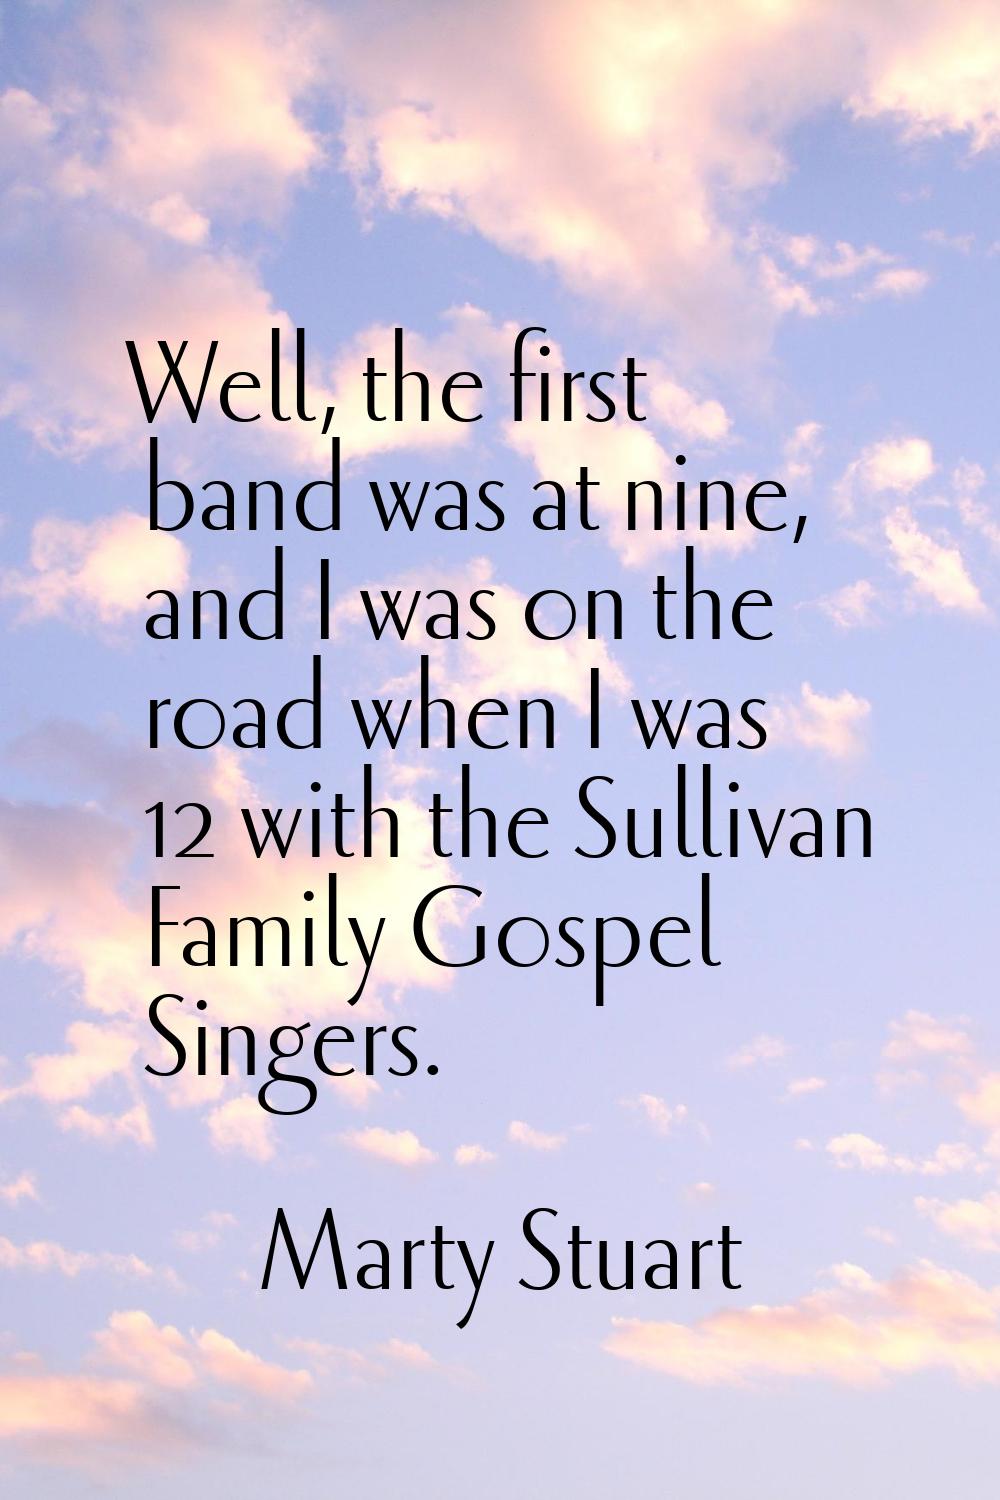 Well, the first band was at nine, and I was on the road when I was 12 with the Sullivan Family Gosp